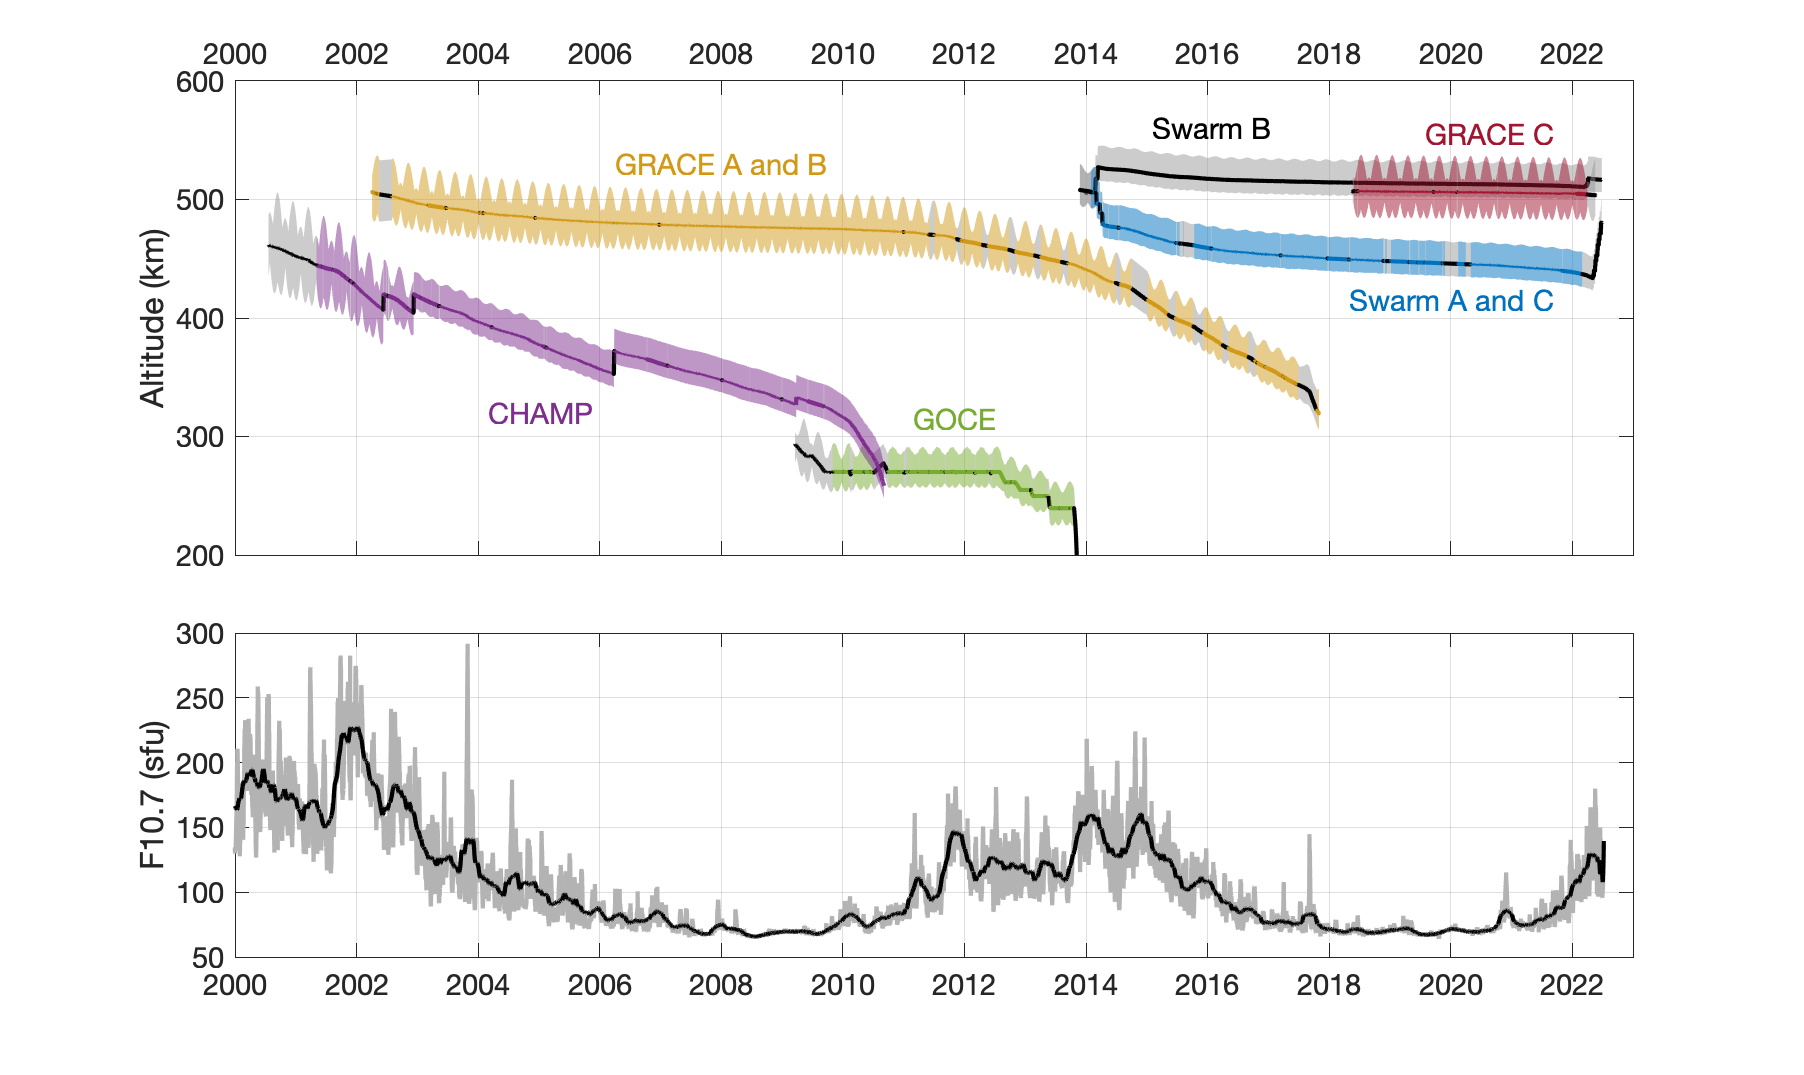 Altitude evolution of accelerometer-carrying satellites (top) and solar activity (bottom).